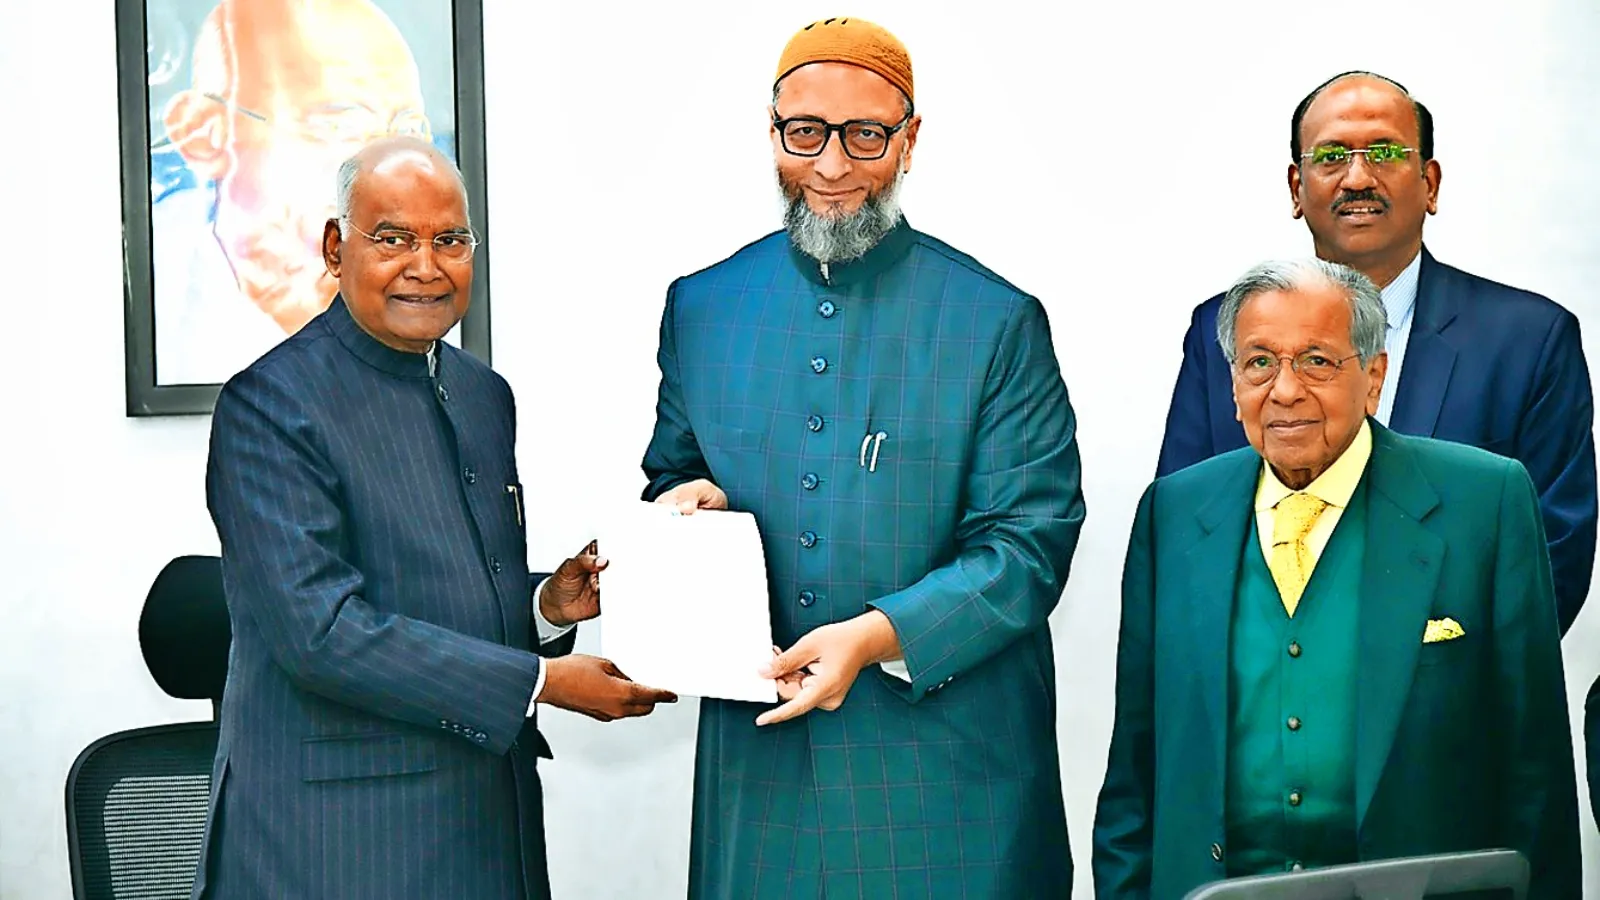 Joint polls see high GDP growth, low inflation: Kovind committee told